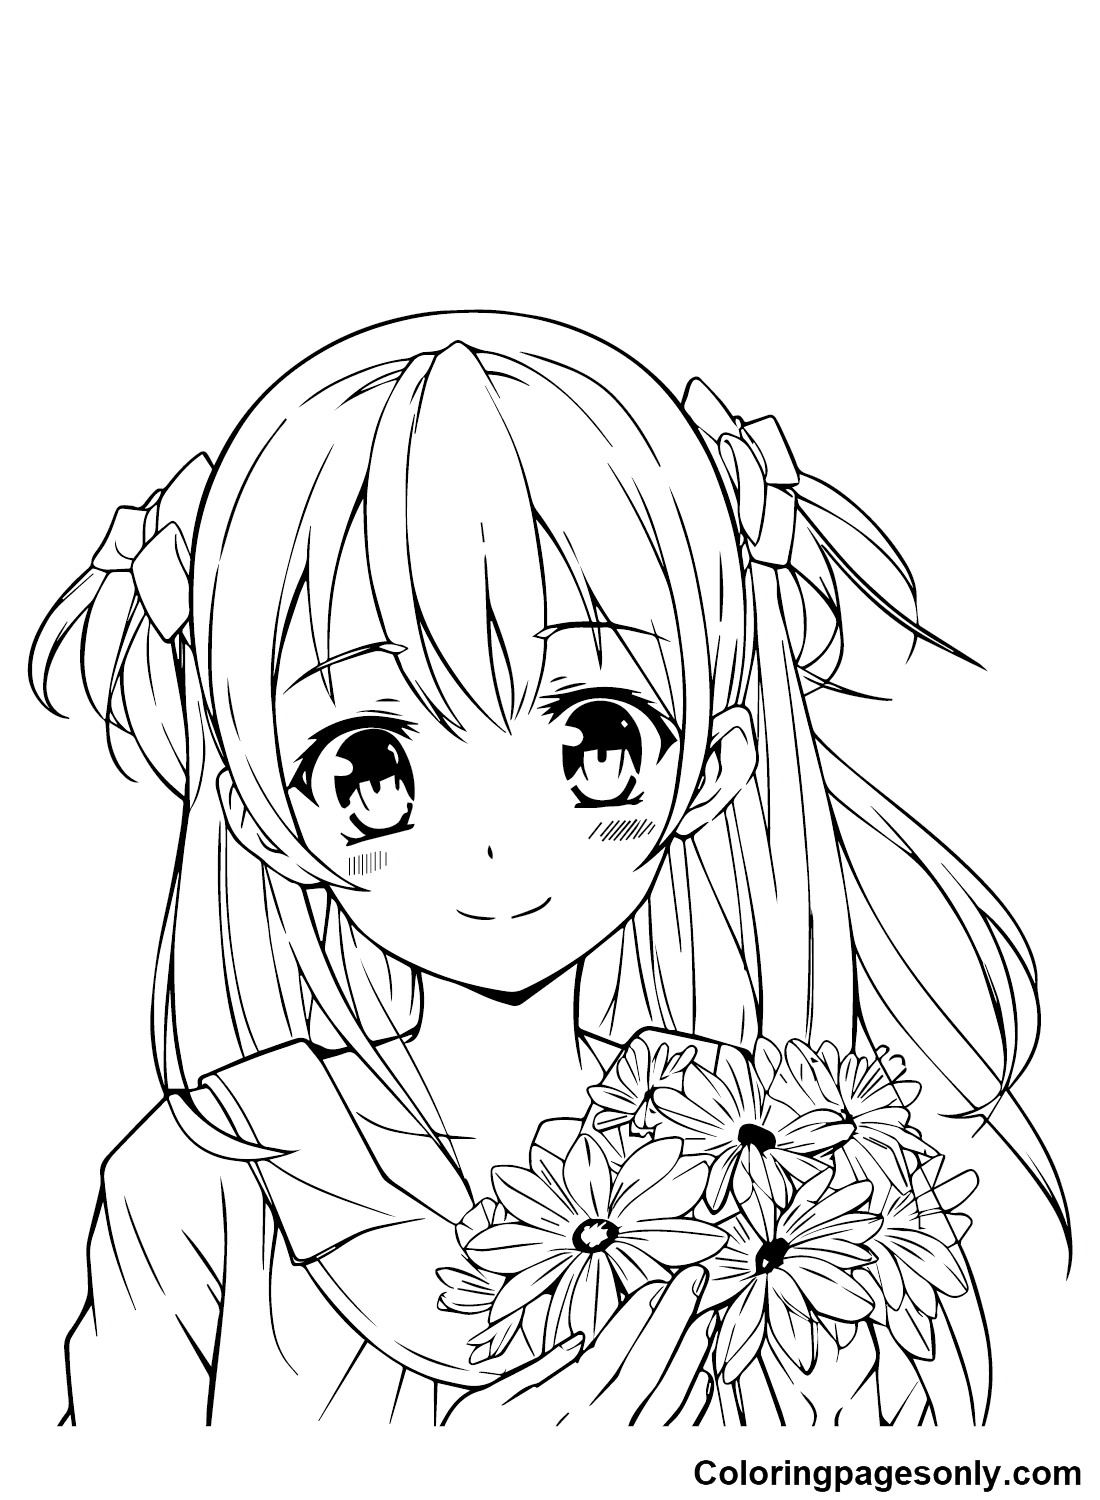 Anime Girl Images Coloring Page